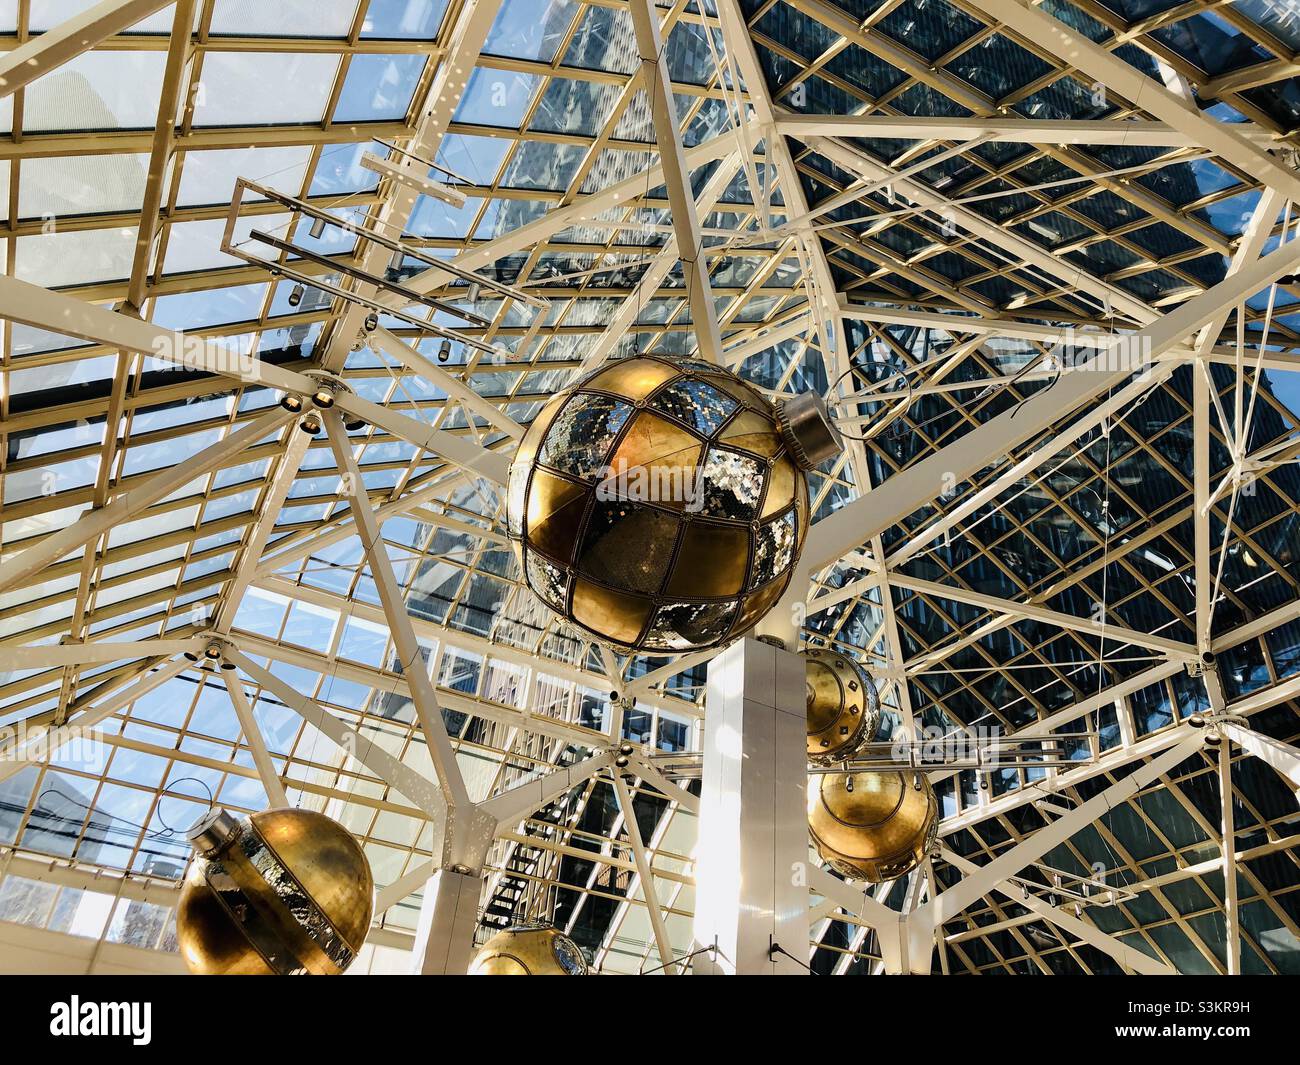 Giant ornaments Christmas decorations Boston’s Prudential center Stock Photo